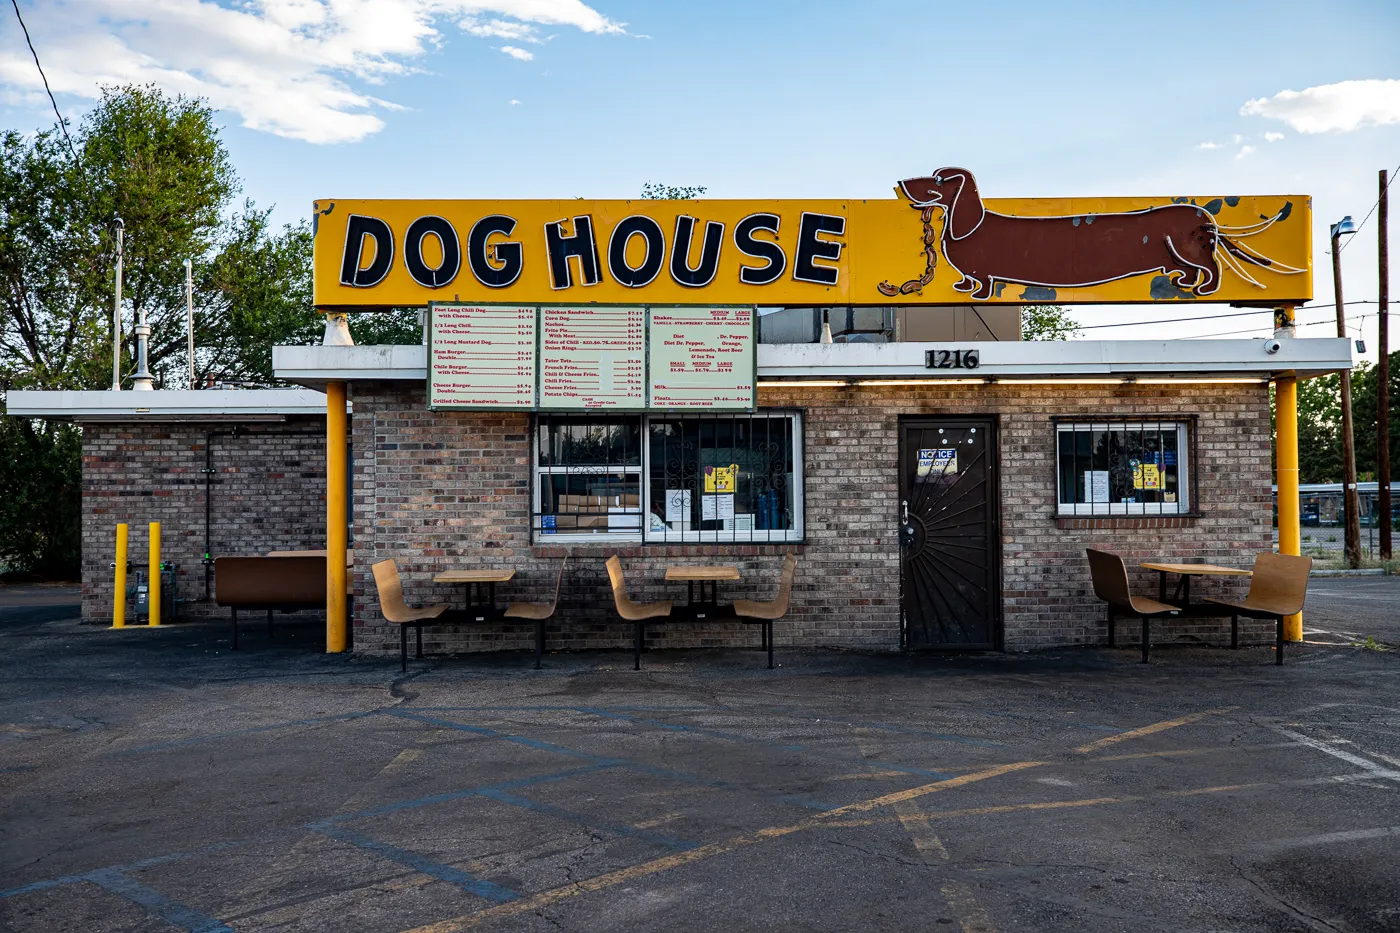 Dog House Drive In in Albuquerque, New Mexico - Route 66 Restaurant and Breaking Bad Filming Location